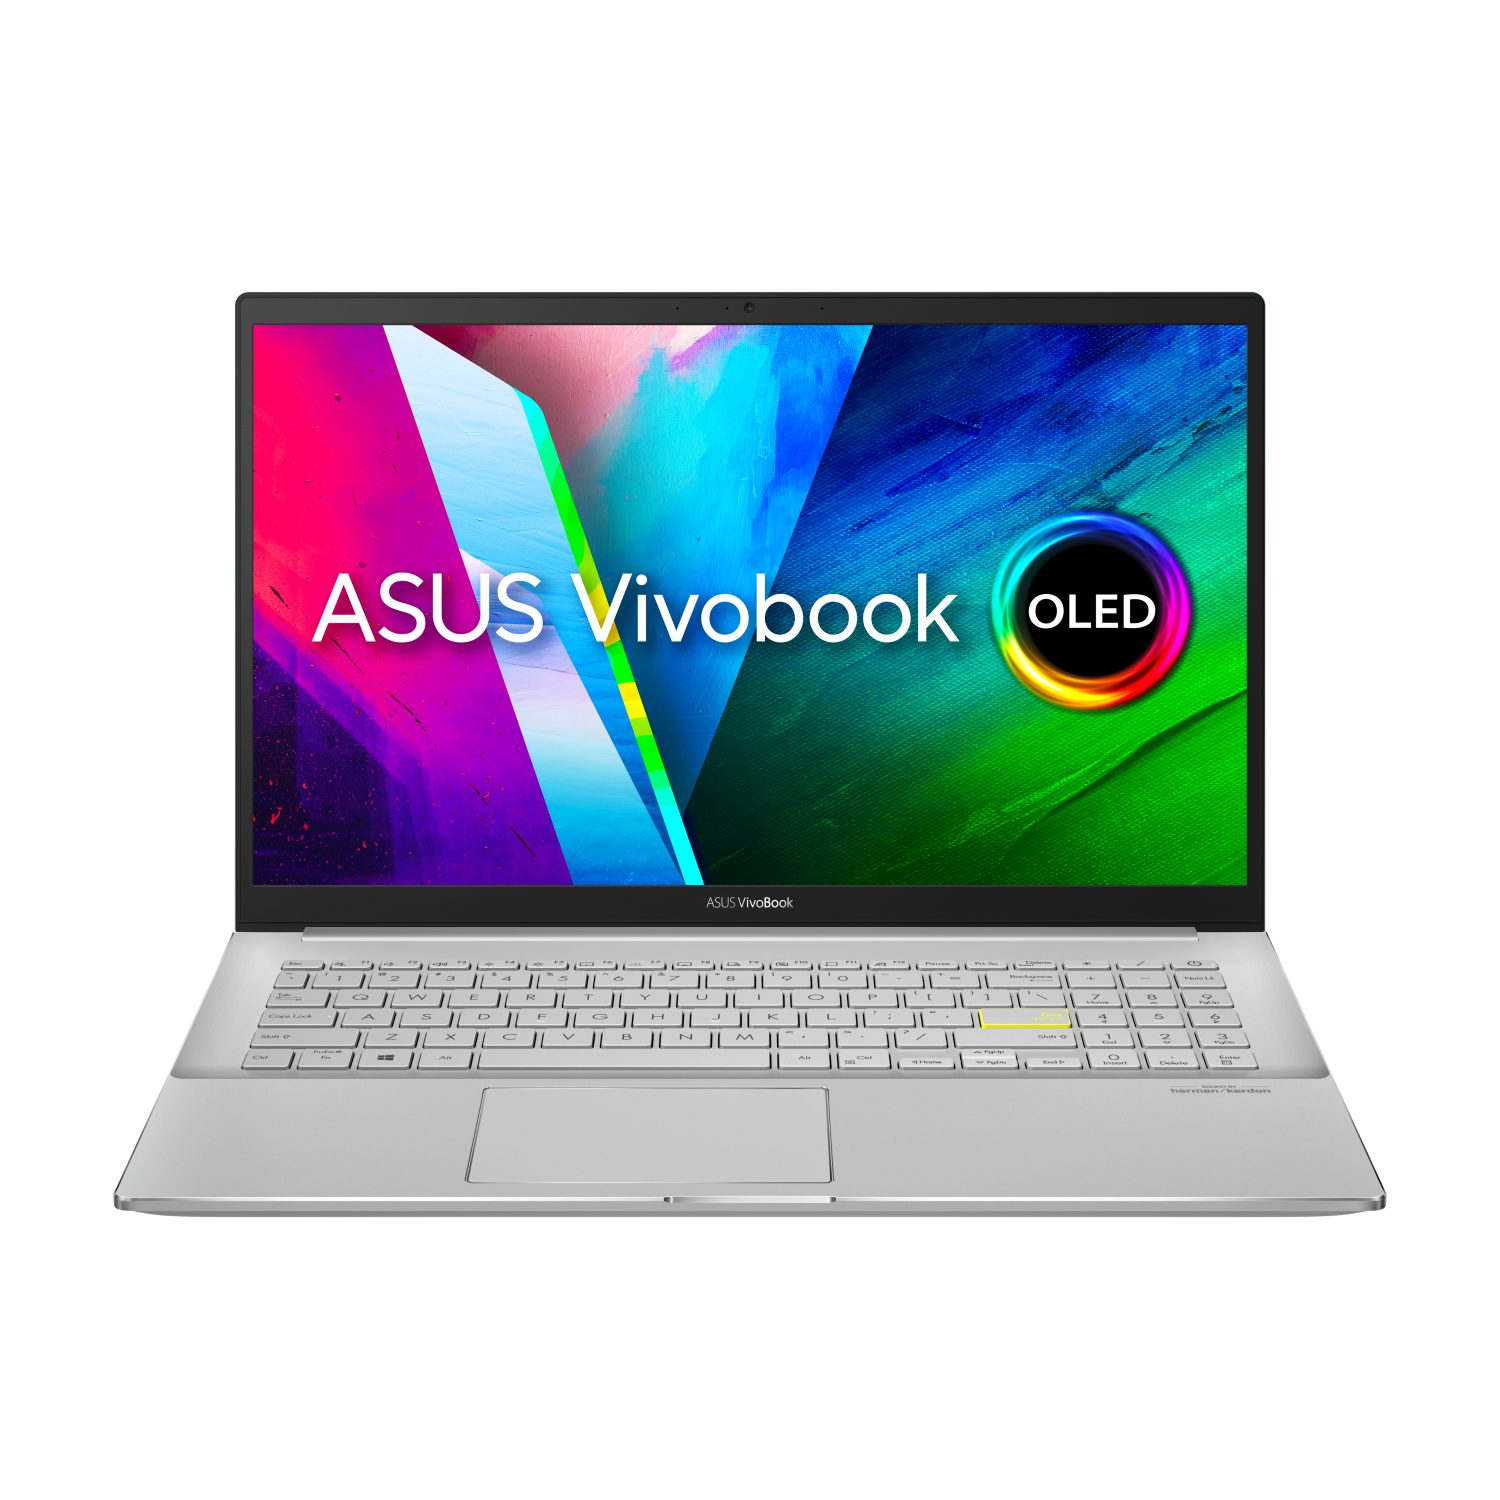 Asus Vivobook S15 OLED S33EP-L1720T Notebook (39,62 cm/15.6 Zoll, Intel  Core i5 1135G7, GeForce MX330, 512 GB SSD, 15,6 Zoll Full-HD OLED, MX330,  Windows 10 Home, silber)